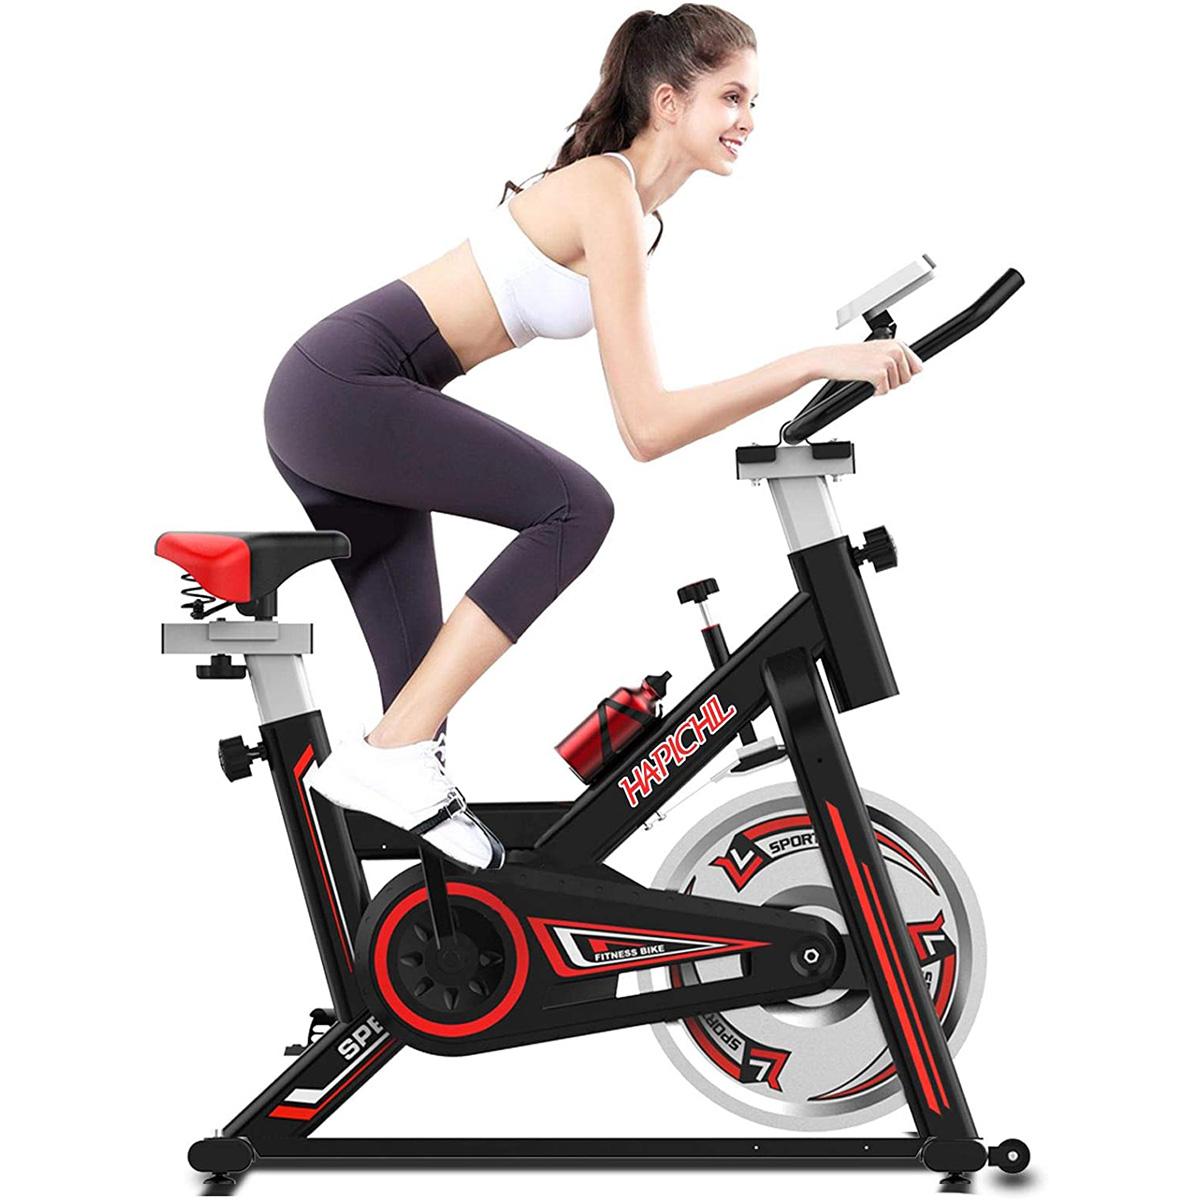 Hapichil Stationary Workout Exercise Bike for $149.97 Shipped